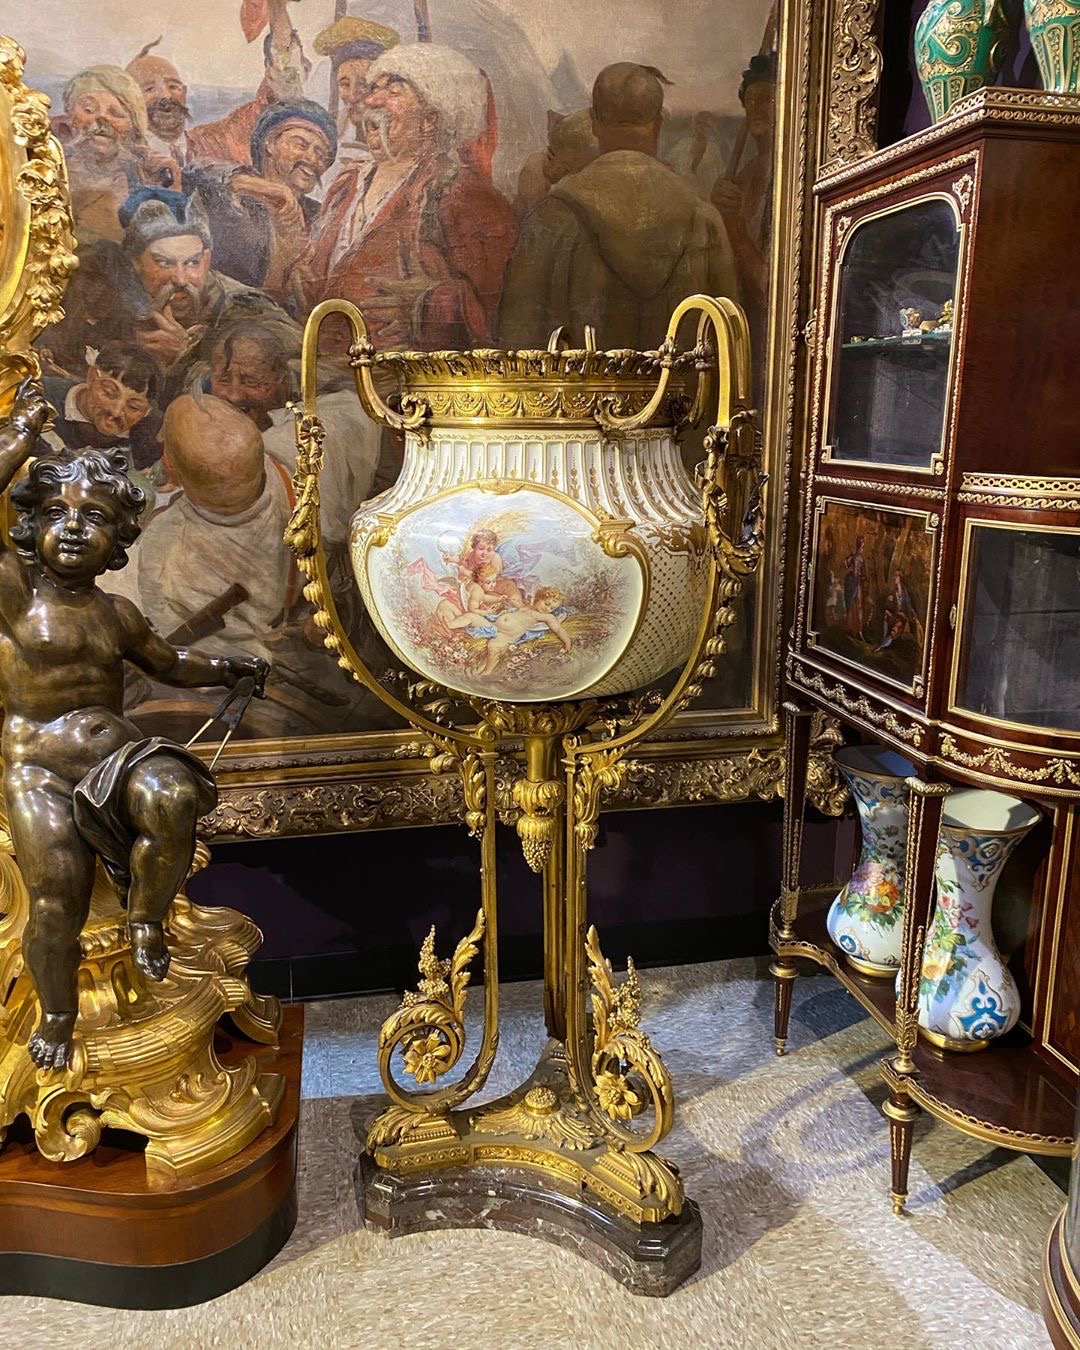 Elaborate Porcelain Jardiniere amongst other items in an antique gallery room